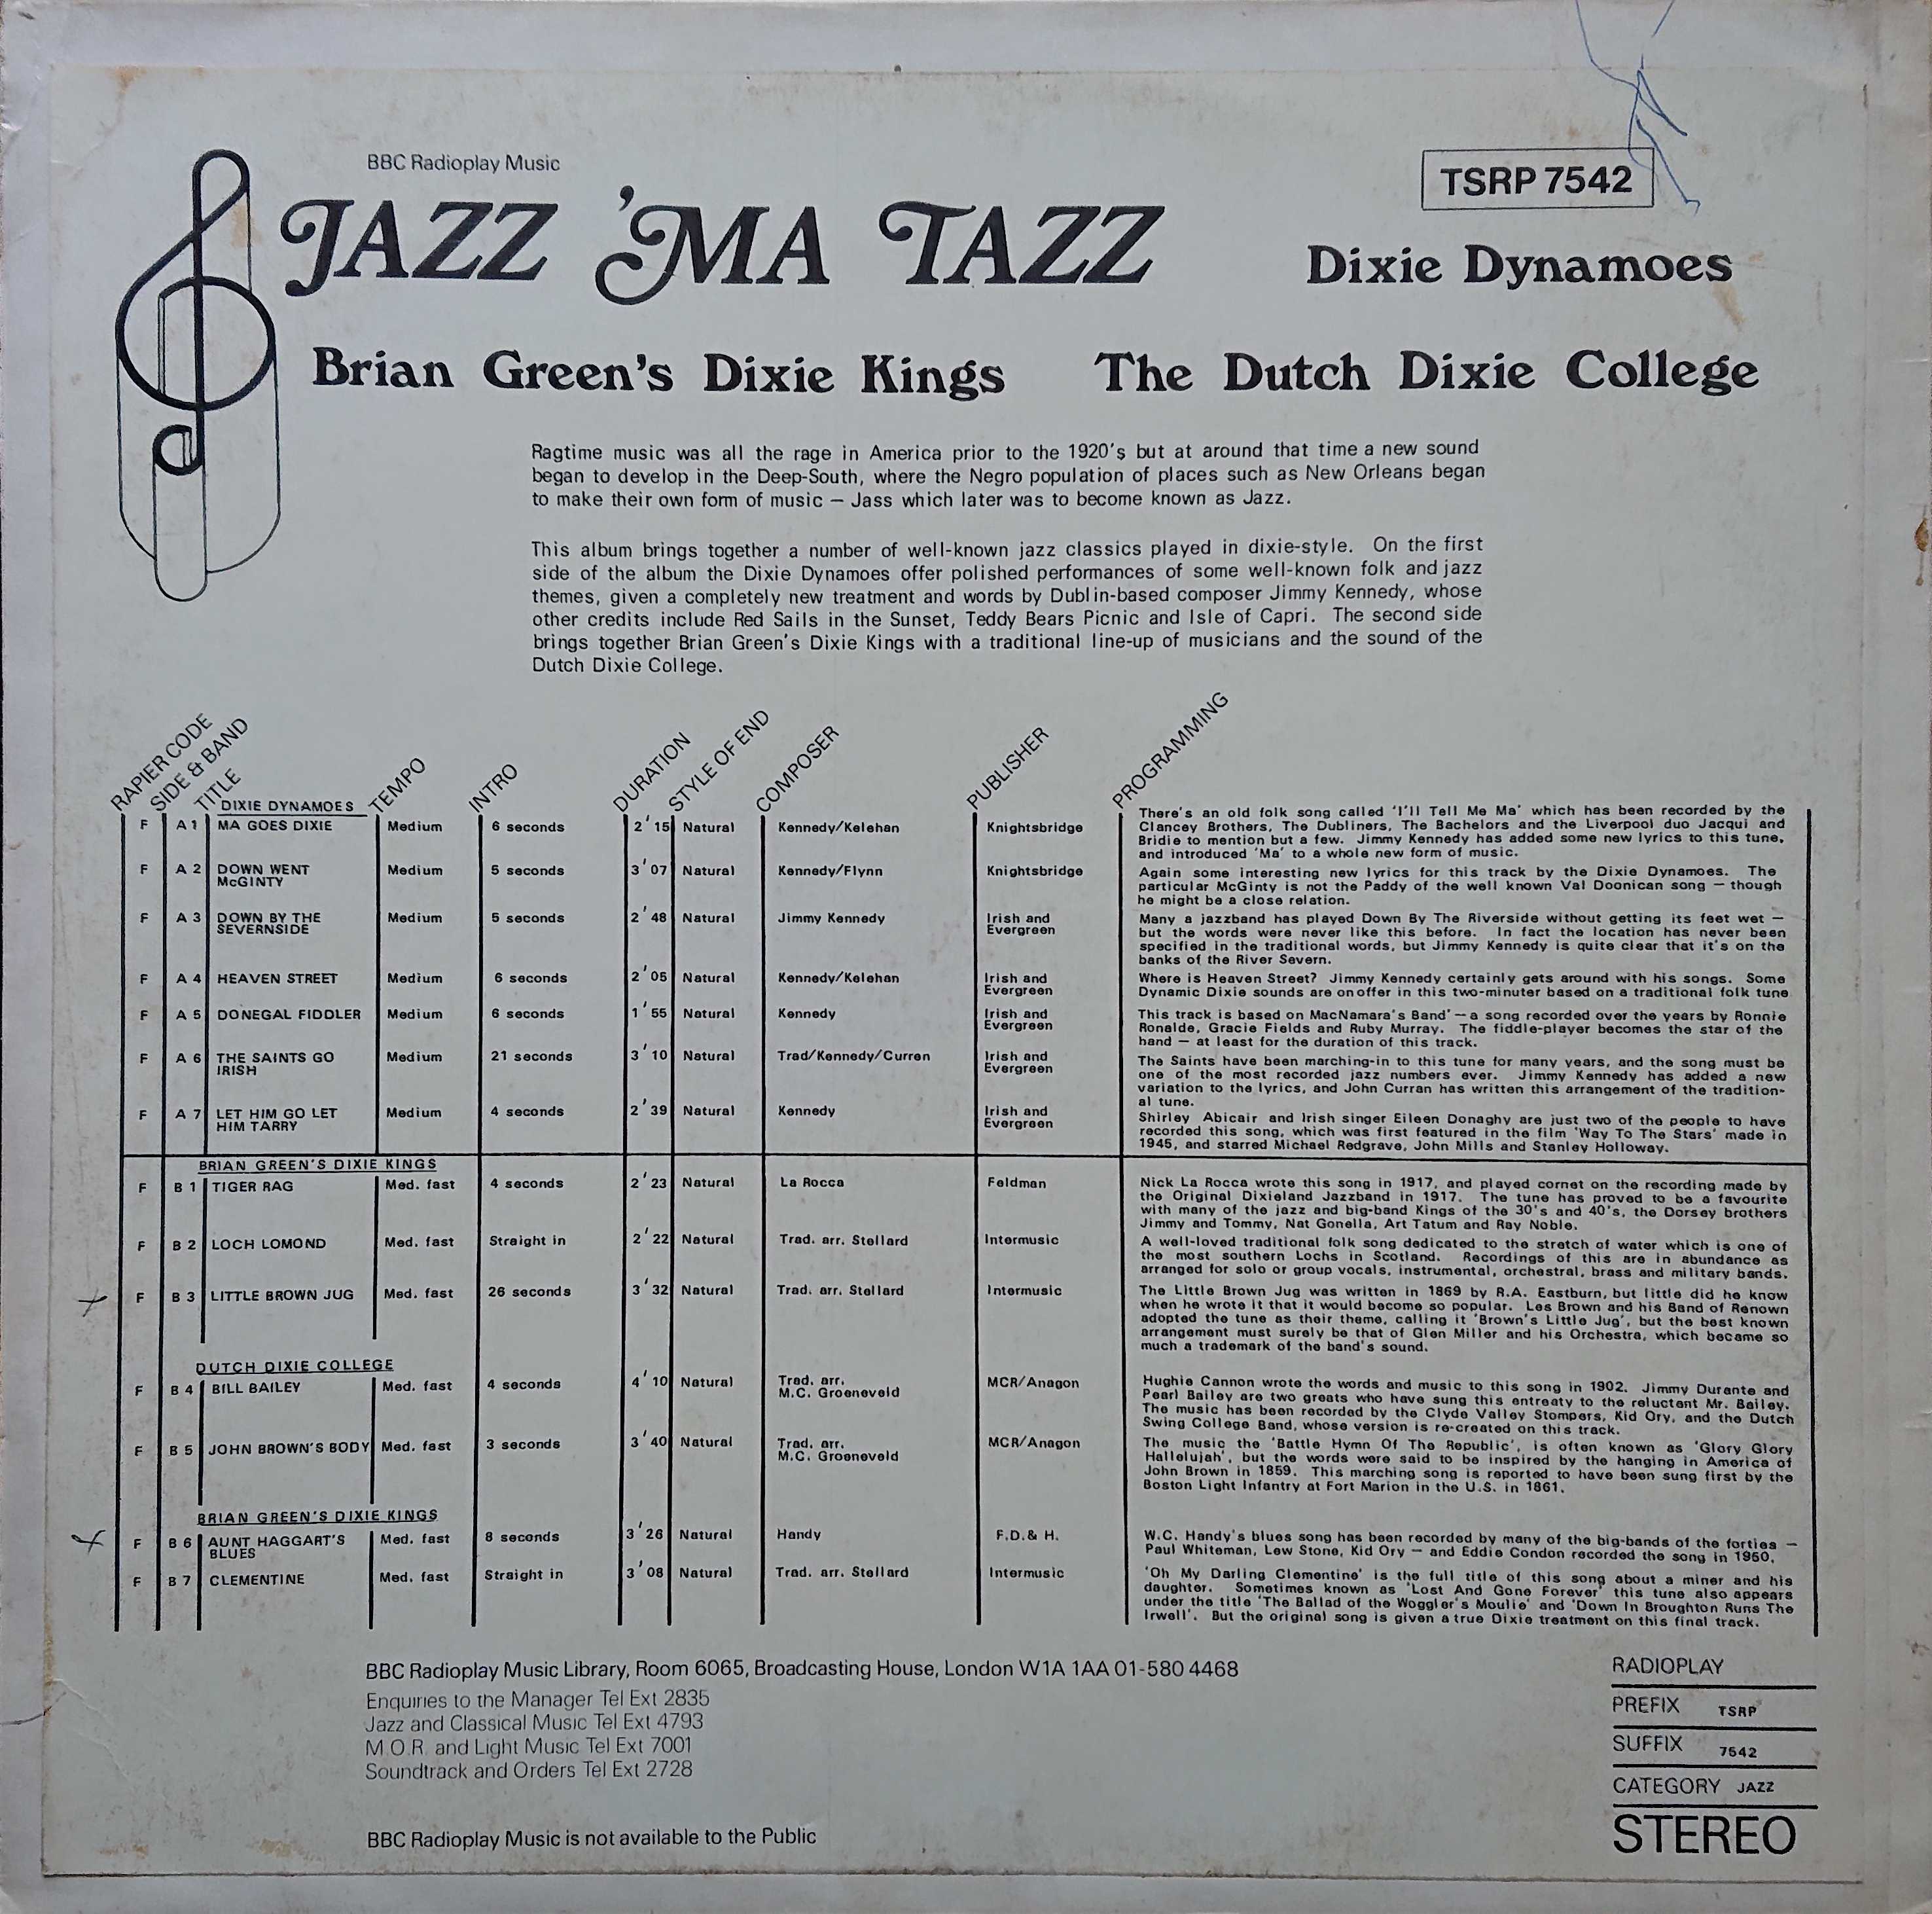 Picture of TSRP 7542 Jazz'ma tazz by artist Brian Green's Dixie Band from the BBC records and Tapes library